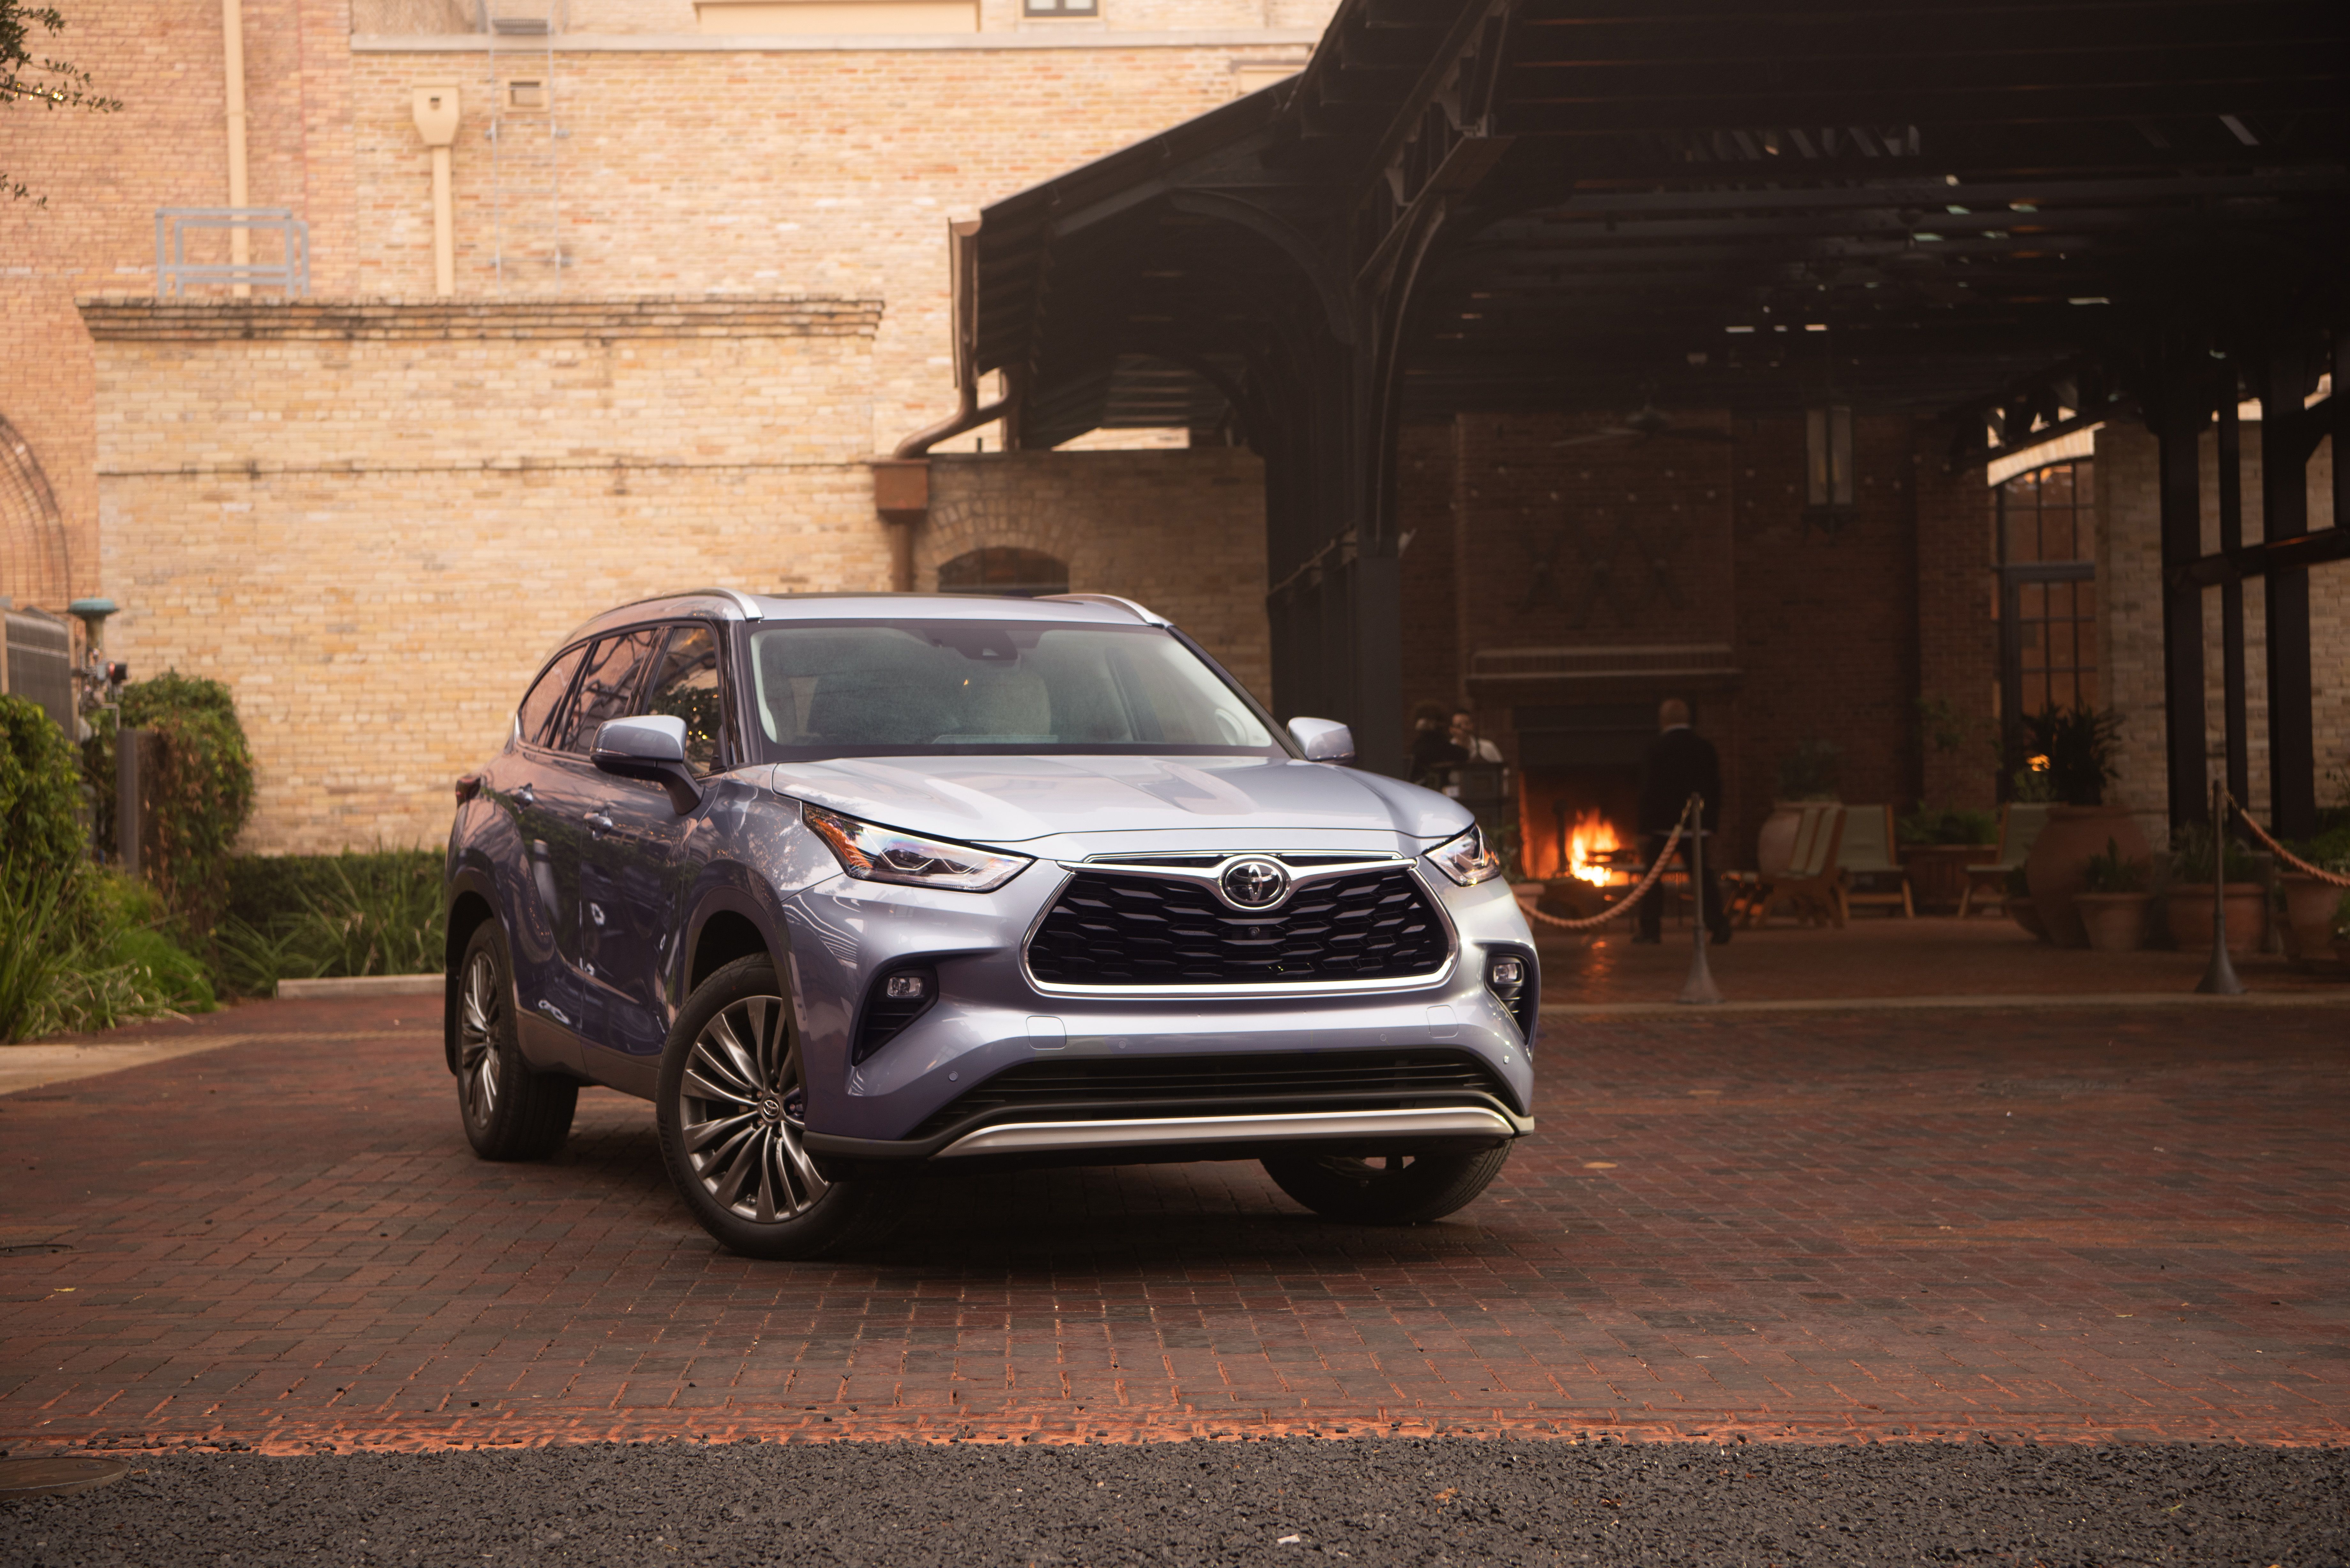 The 2020 Toyota Highlander parked in front of a private house.